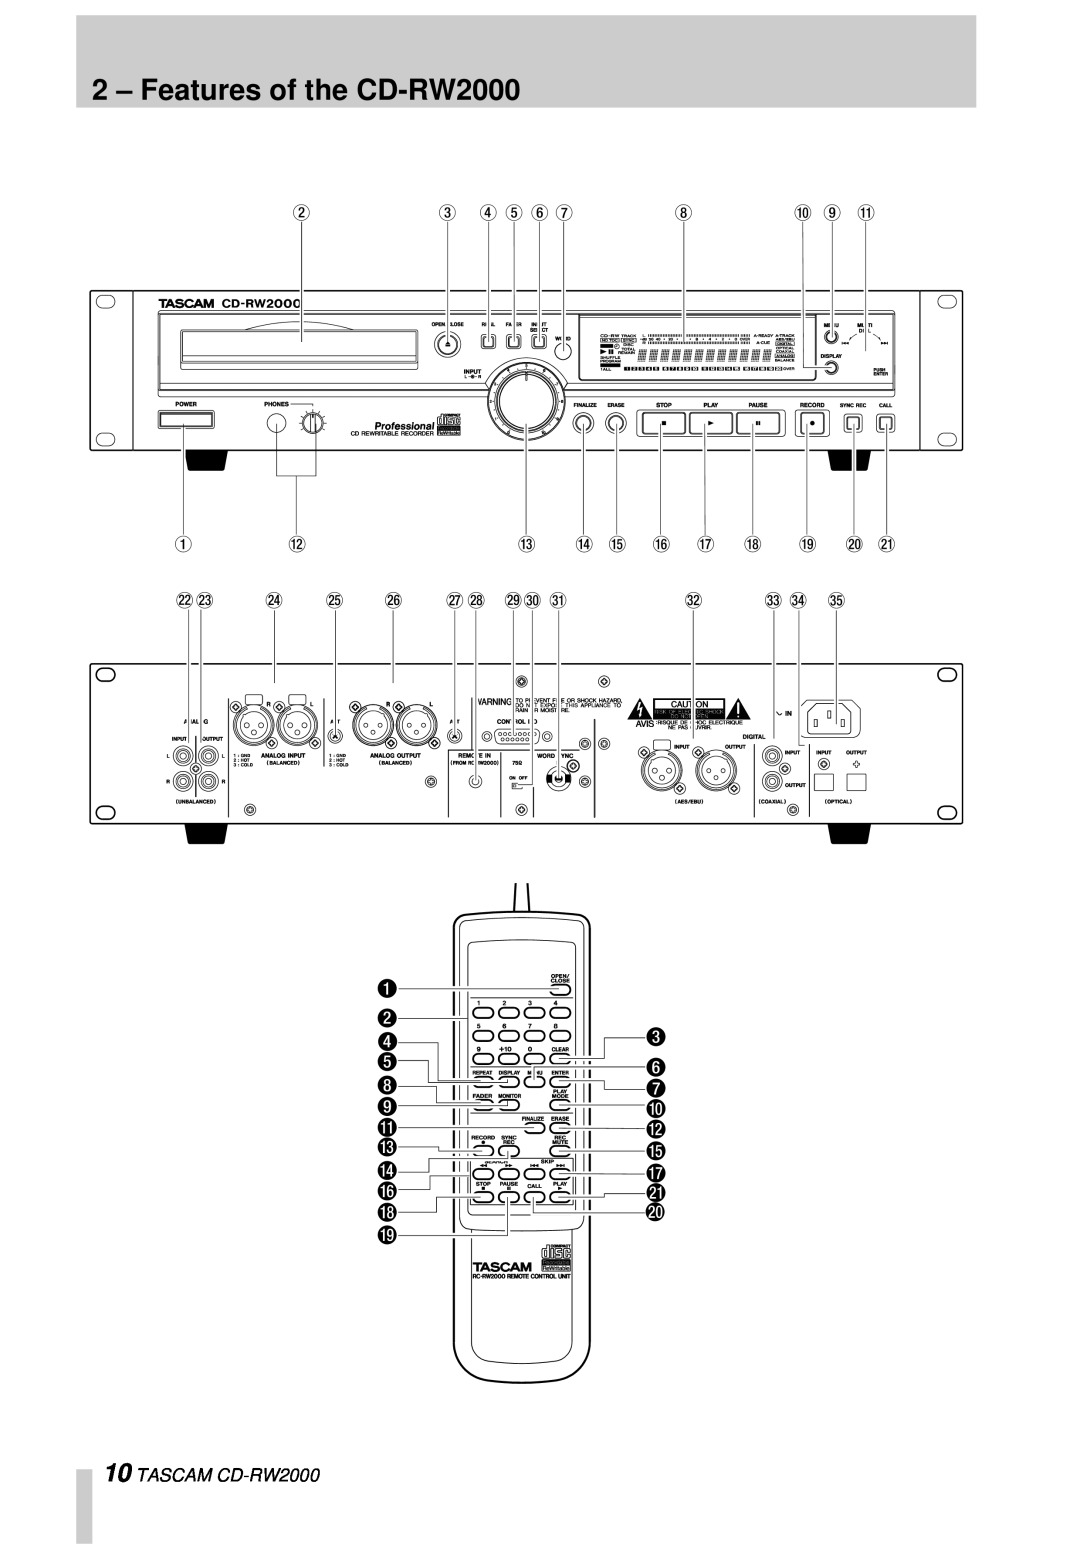 Tascam owner manual Features of the CD-RW2000, 1 2 4 5 8 9 B D E G I J, 3 6 7 A C F H L K 